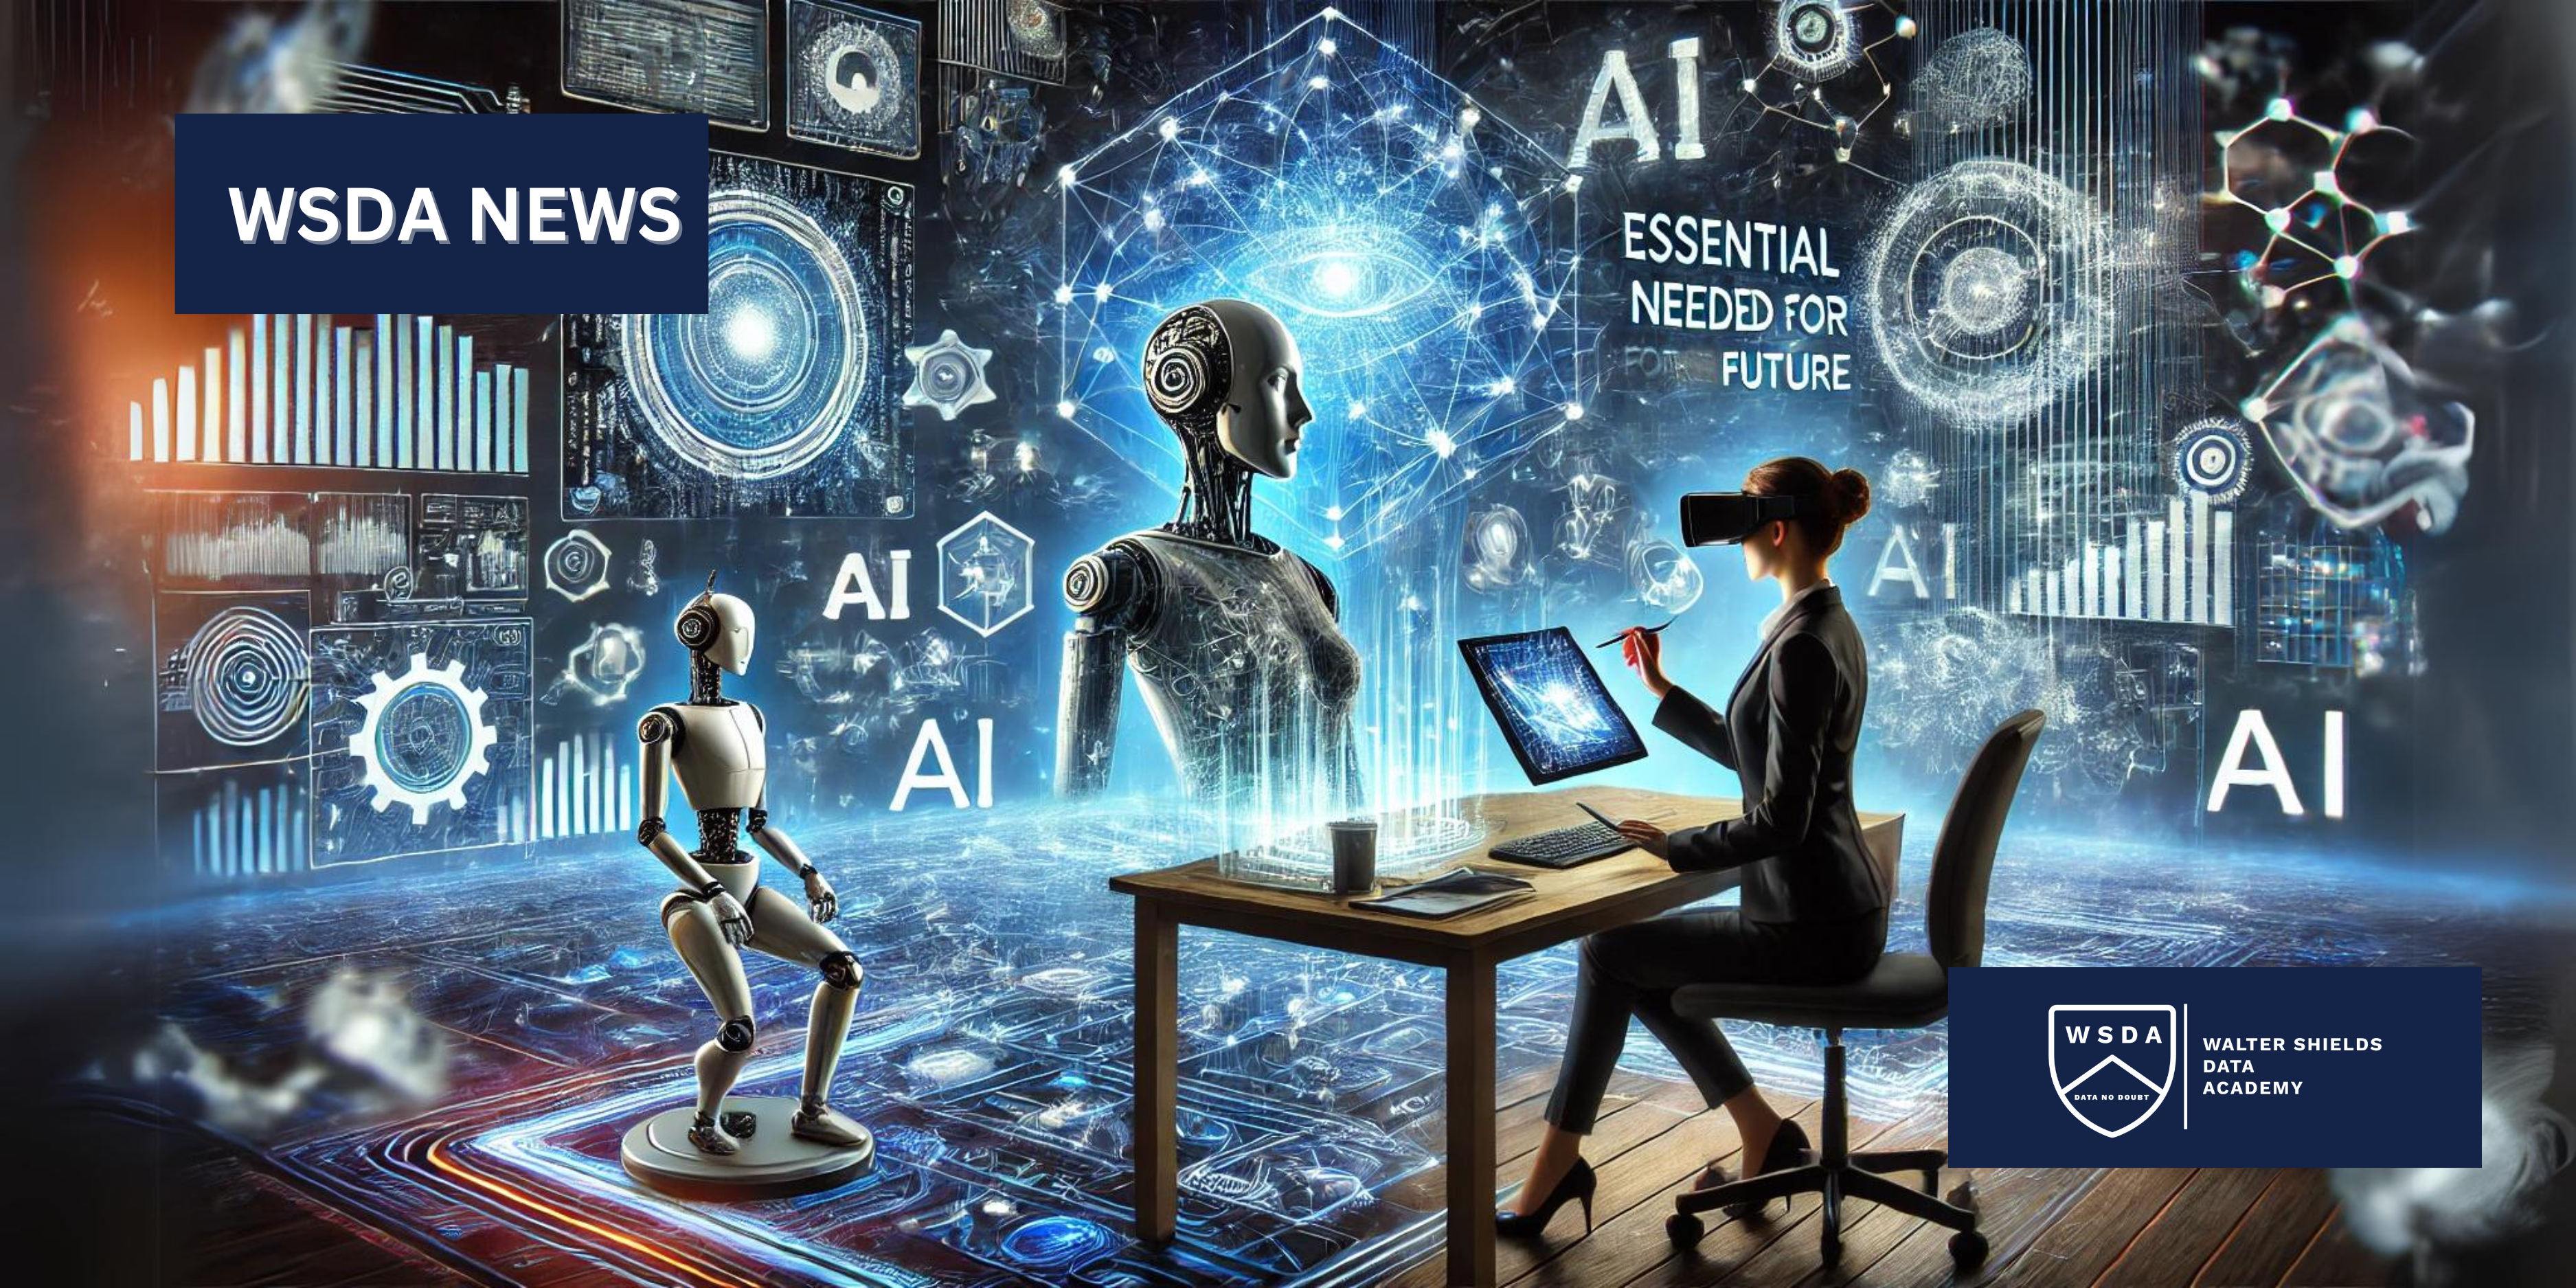 7 Essential Skills for Thriving in the AI Revolution